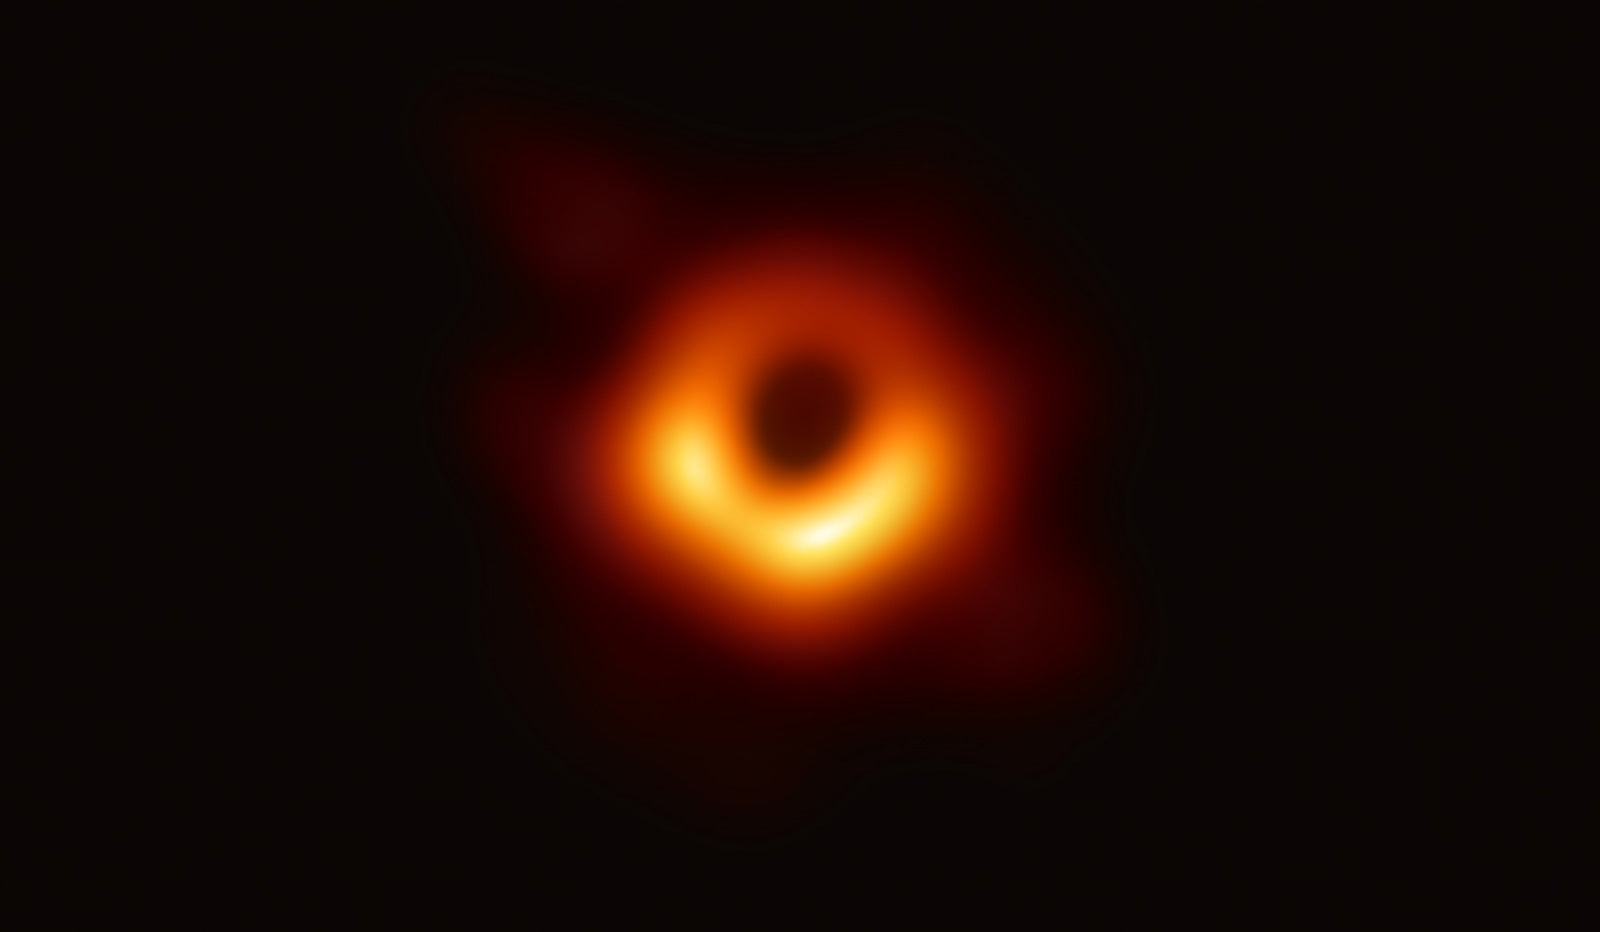 image of the black hole at the center of galaxy M87